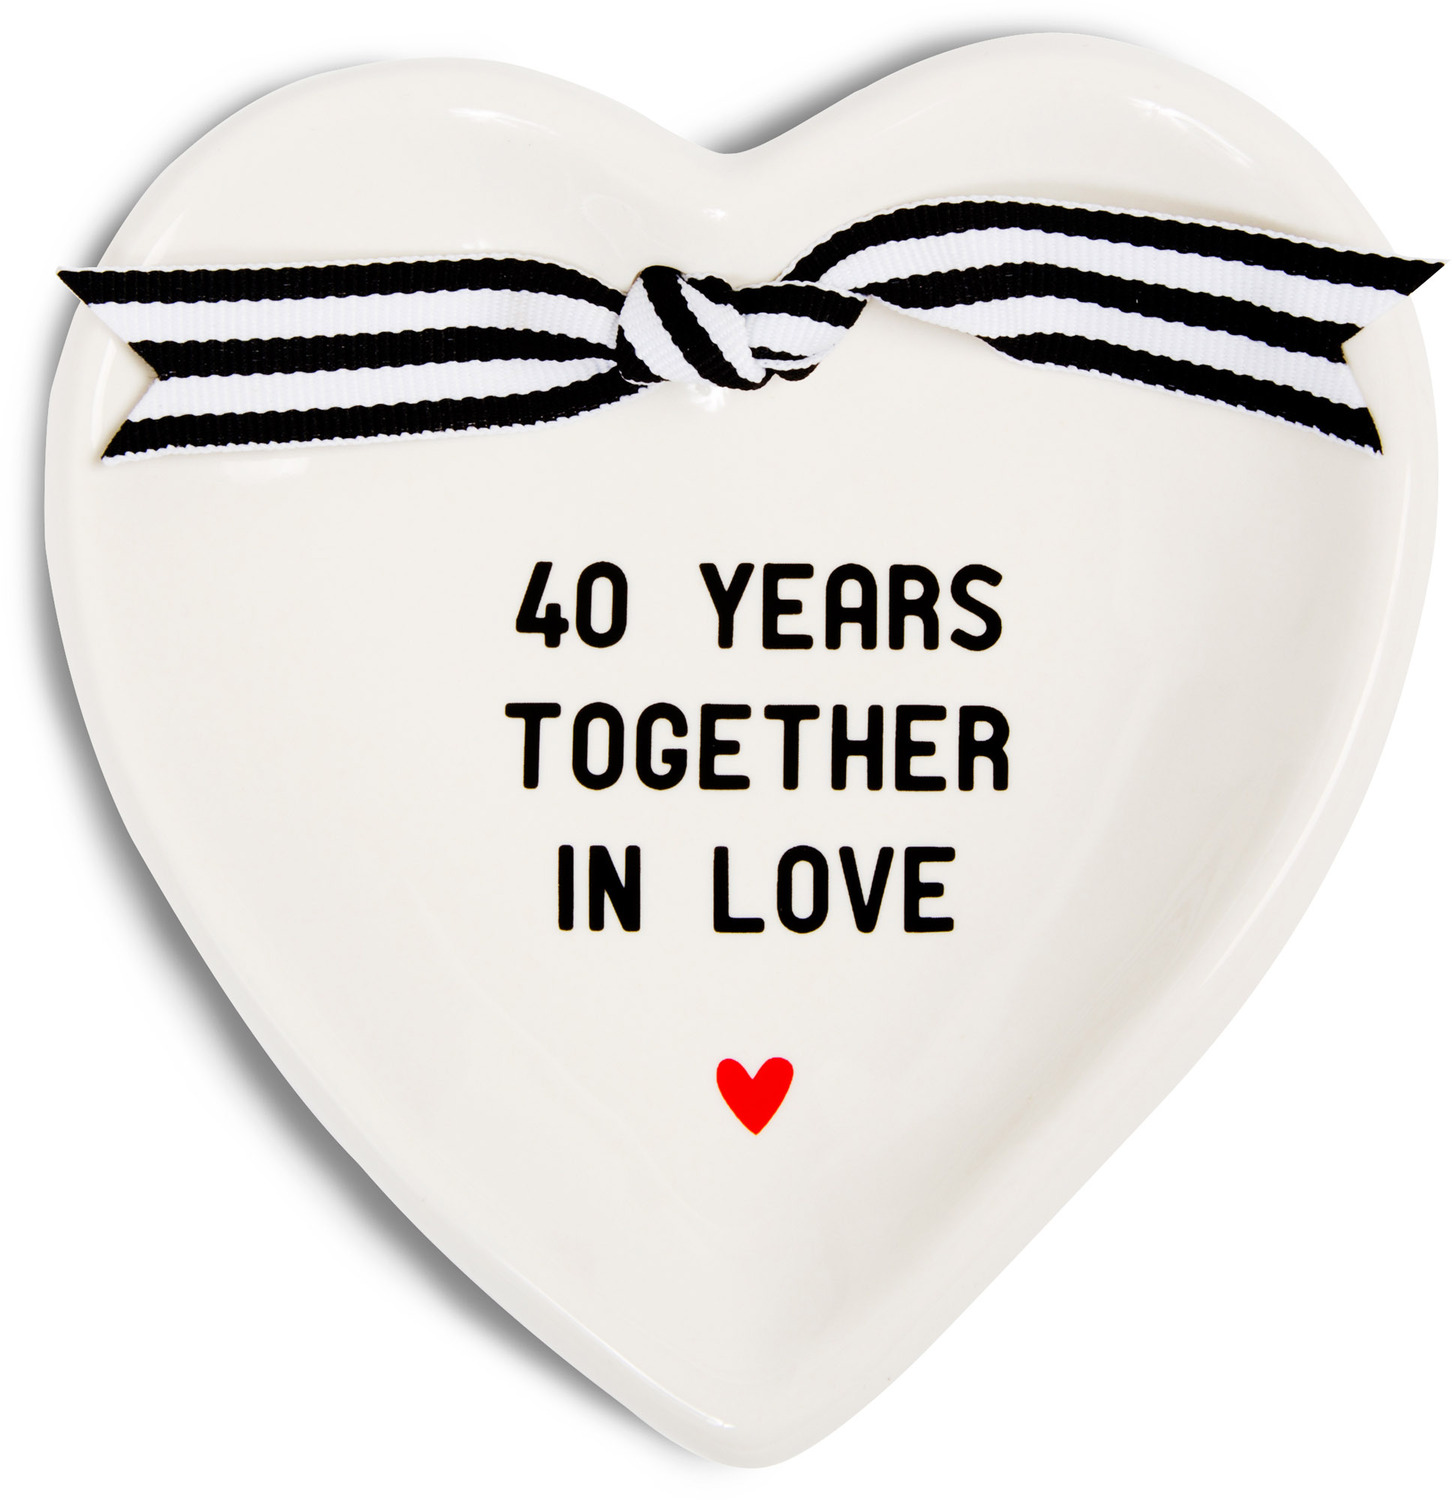 40th Anniversary by The Milestone Collection - 40th Anniversary - 4.5" x 4.5" Heart-Shaped Keepsake Dish